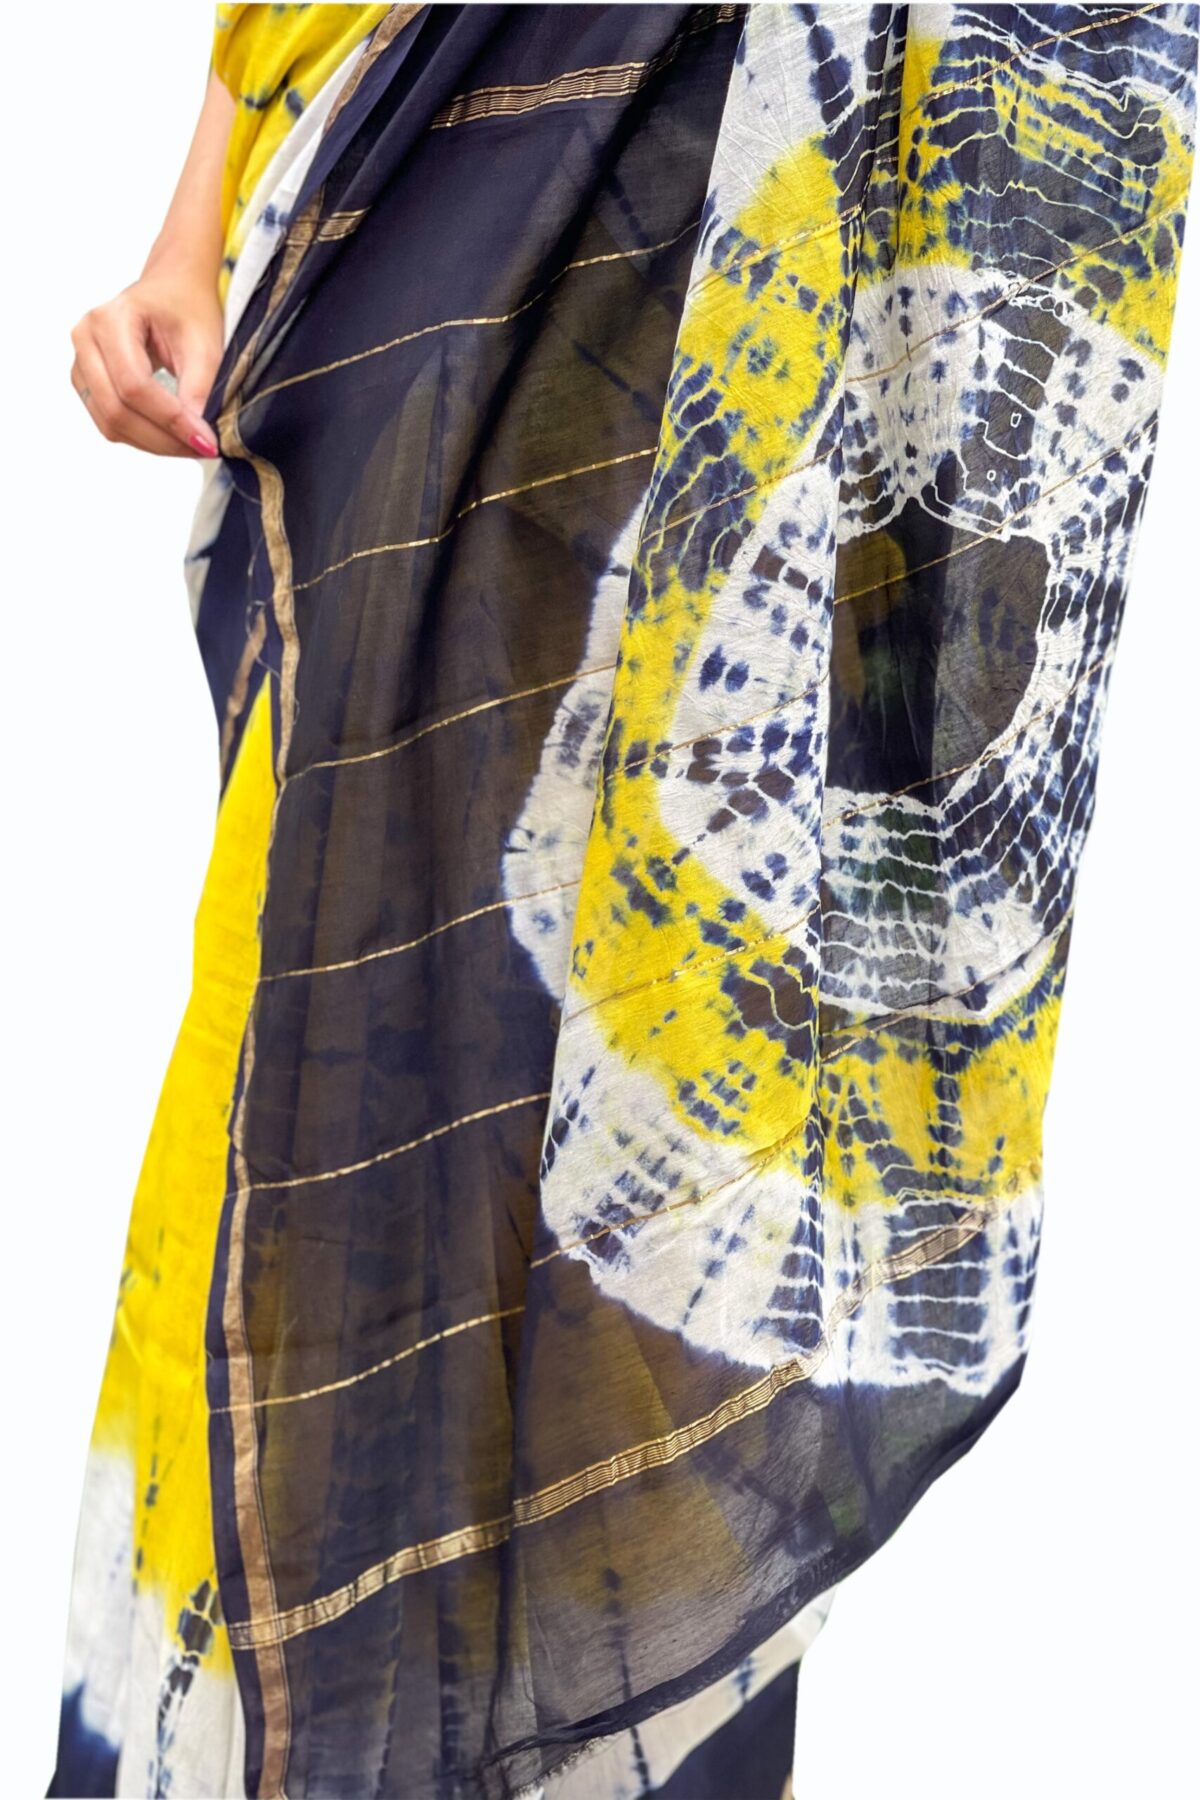 Chanderi Saree with Blouse Piece (Navy Blue & Yellow)